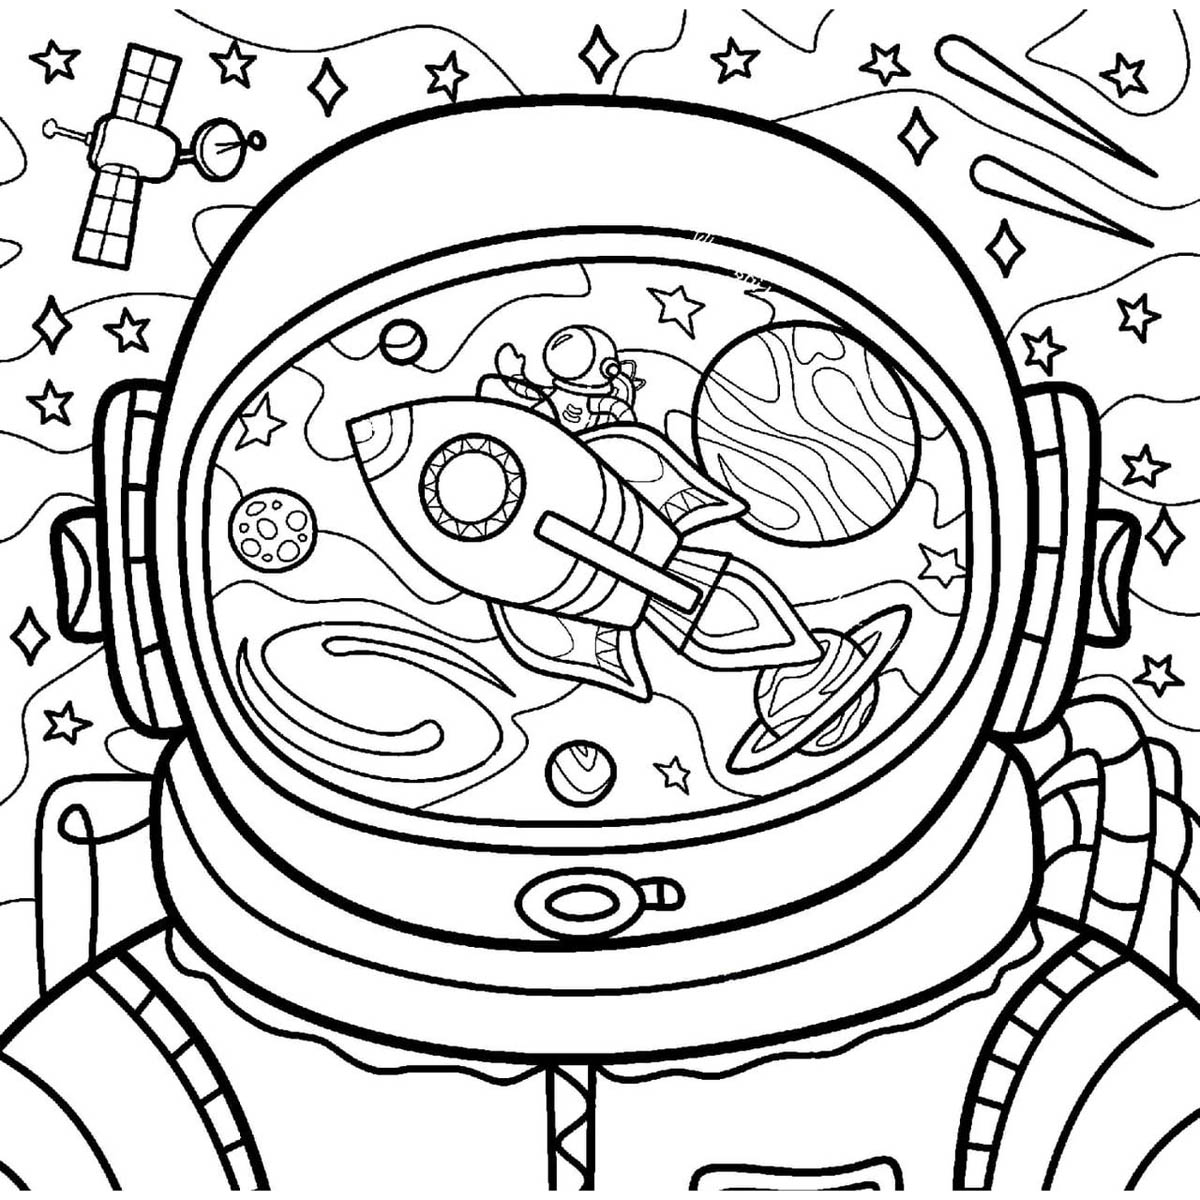 Free Astronaut Coloring Pages Printable printable